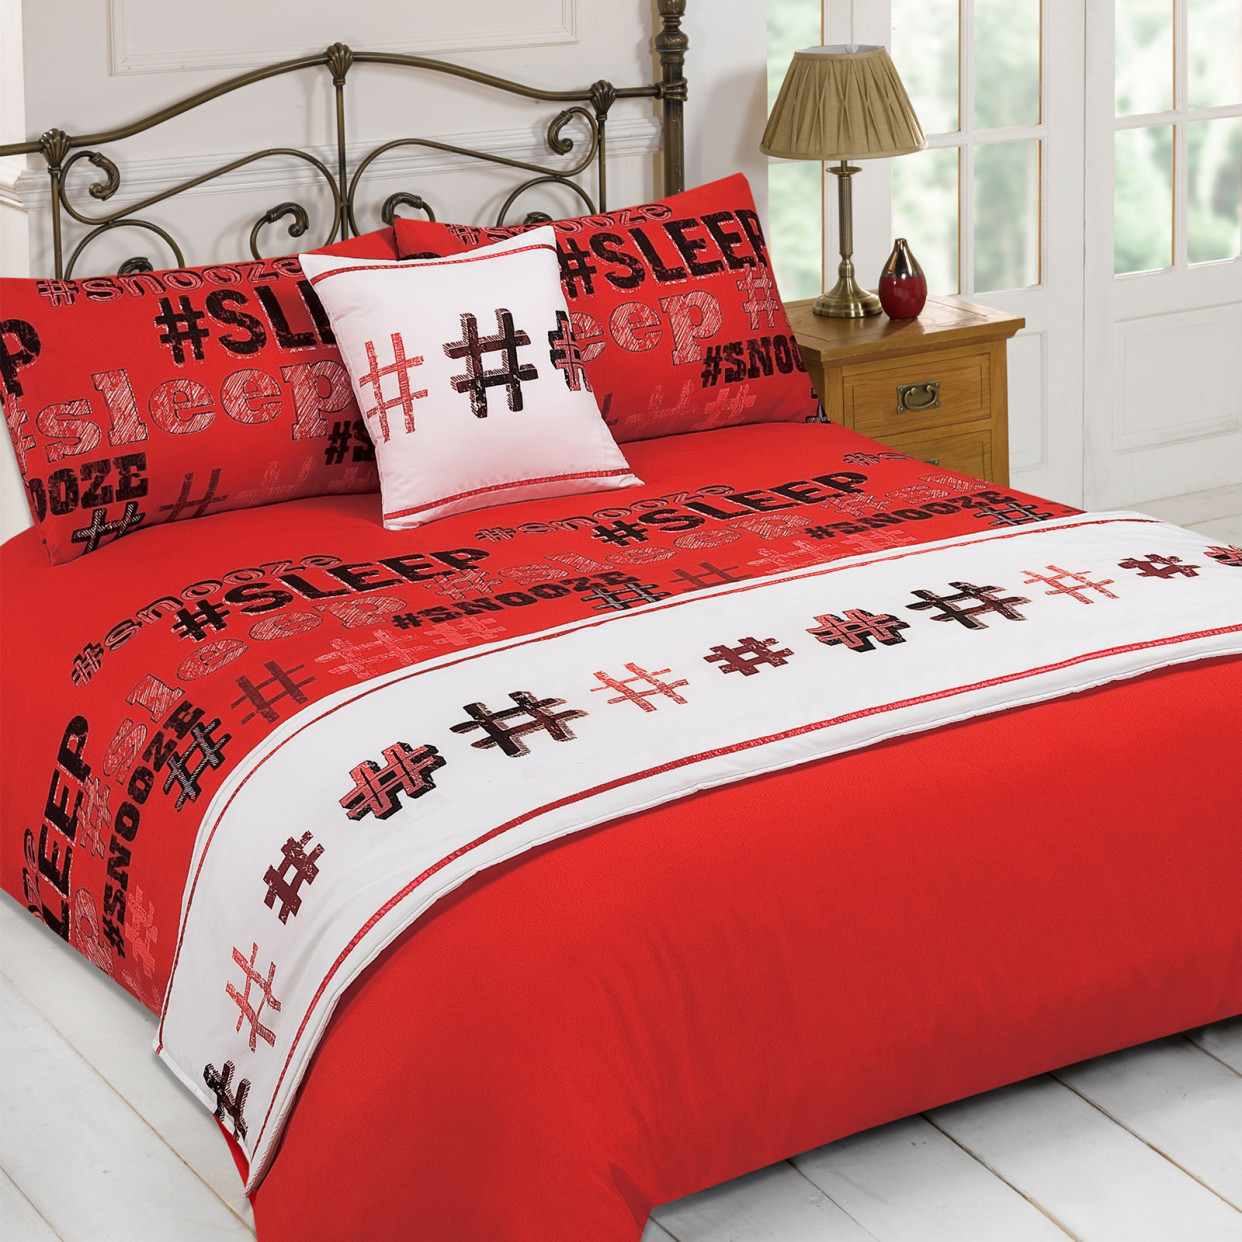 Dreamscene Hashtag 5 Piece Bed in a Bag Set Red - Single>